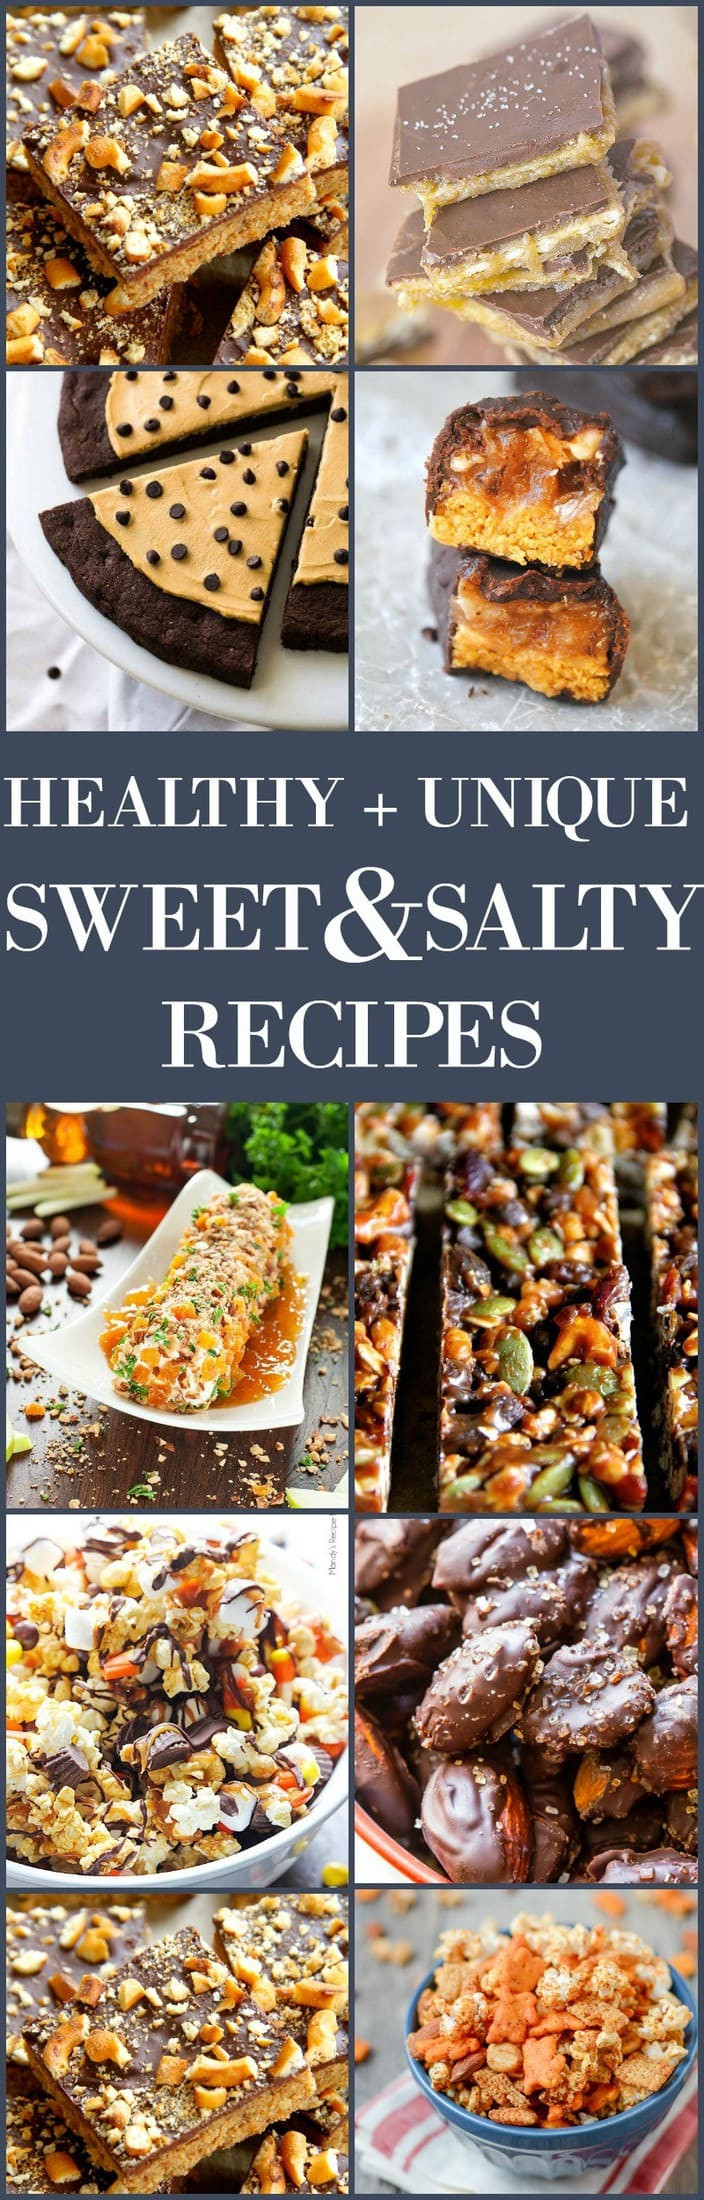 Healthy Salty Snacks
 15 Healthy Sweet and Salty Snacks and Recipes